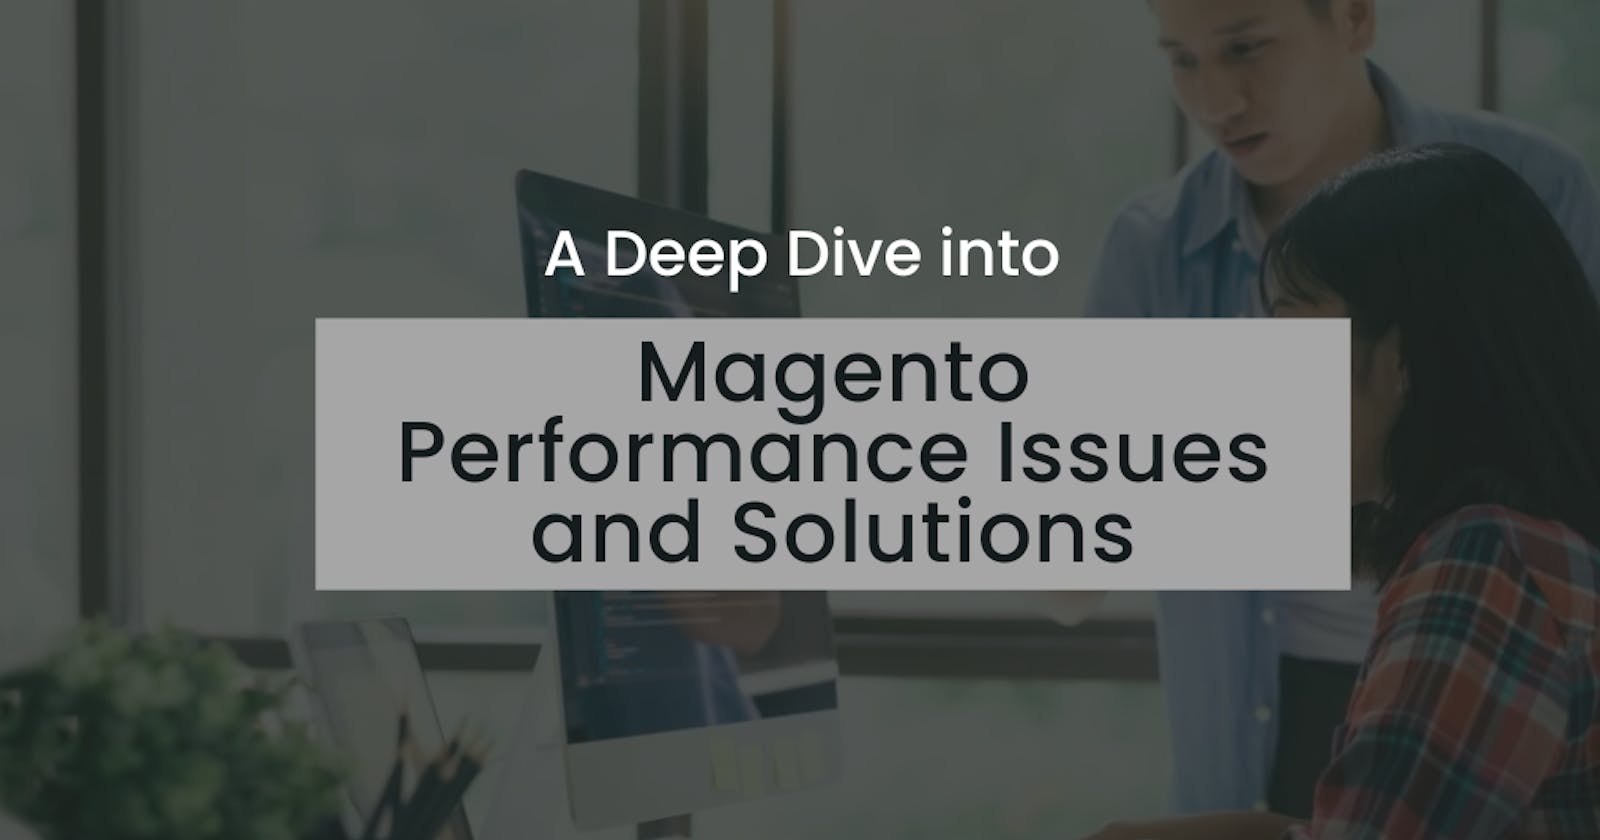 A Deep Dive into Magento Performance Issues and Solutions